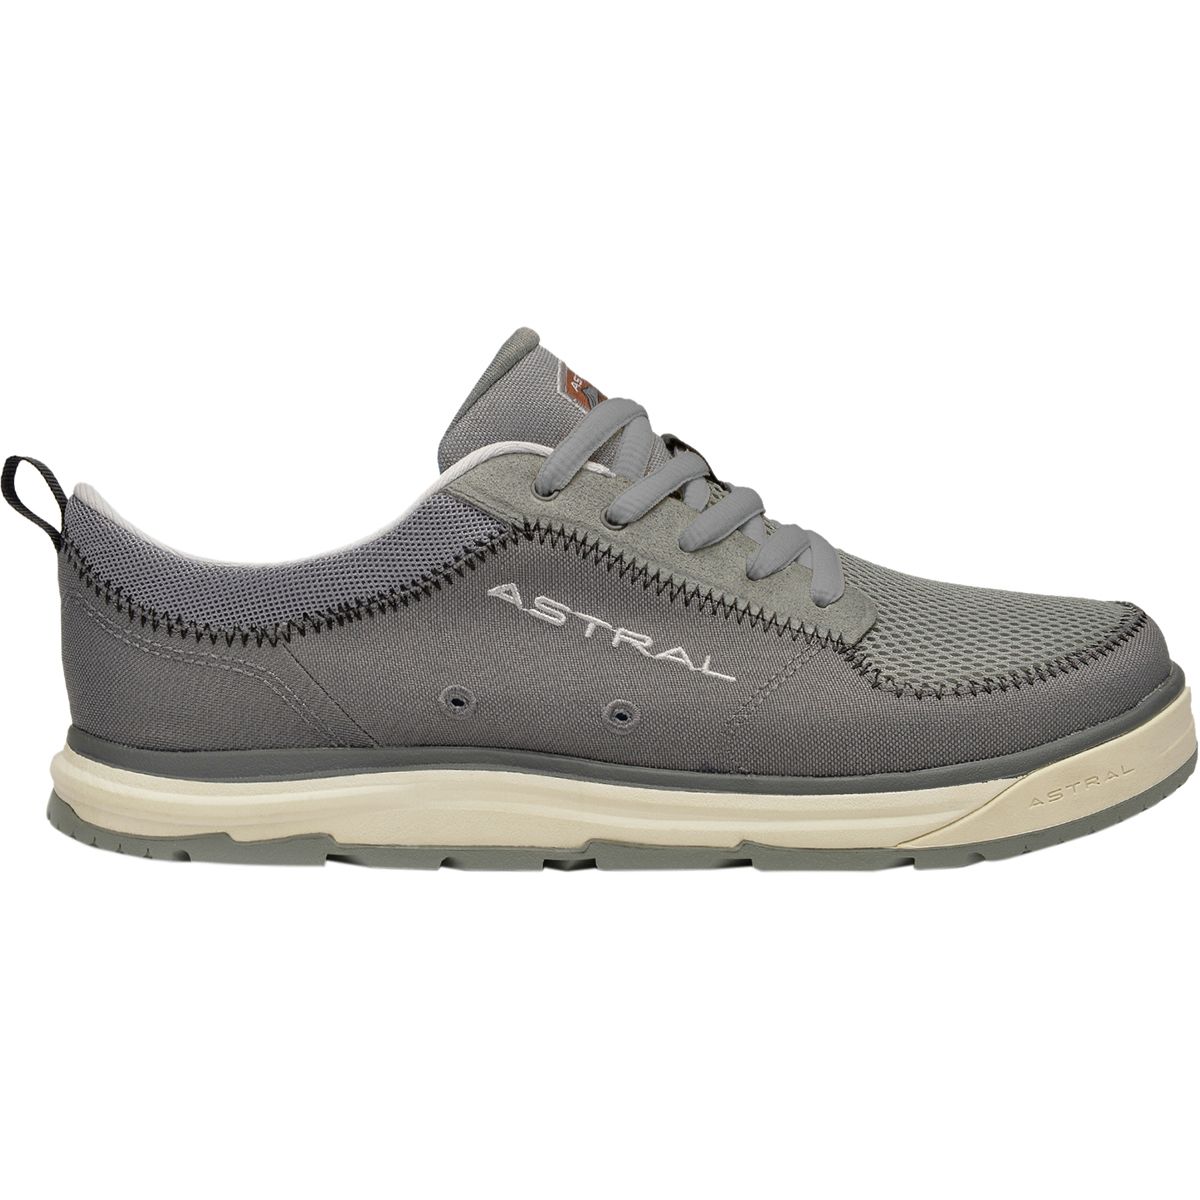 Astral Brewer 2 Water Shoe - Men's 